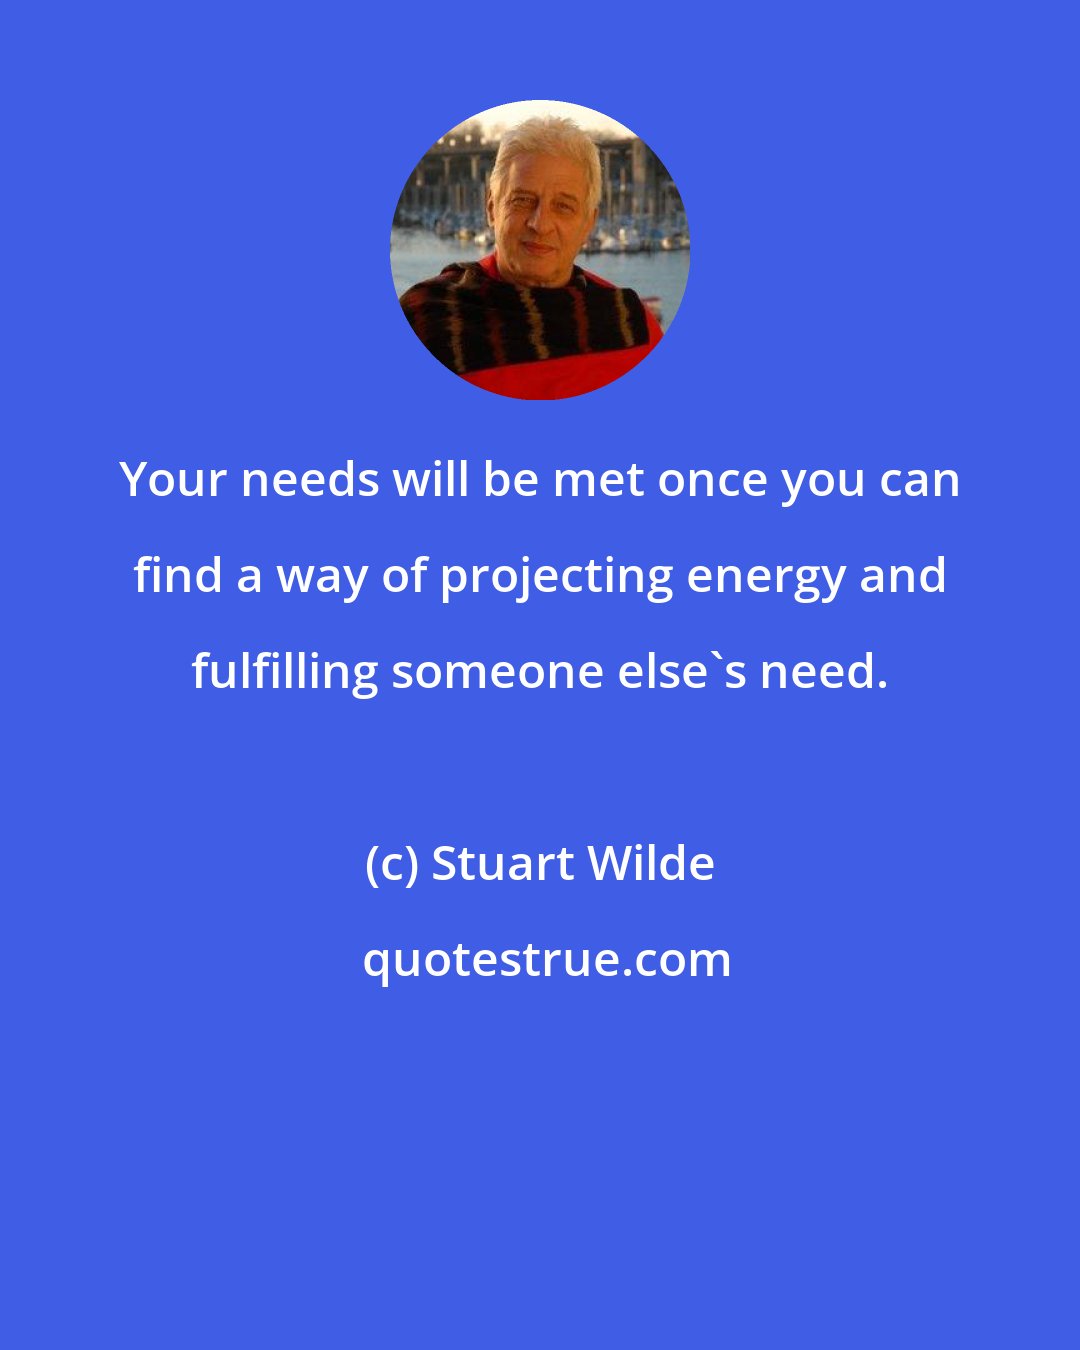 Stuart Wilde: Your needs will be met once you can find a way of projecting energy and fulfilling someone else's need.